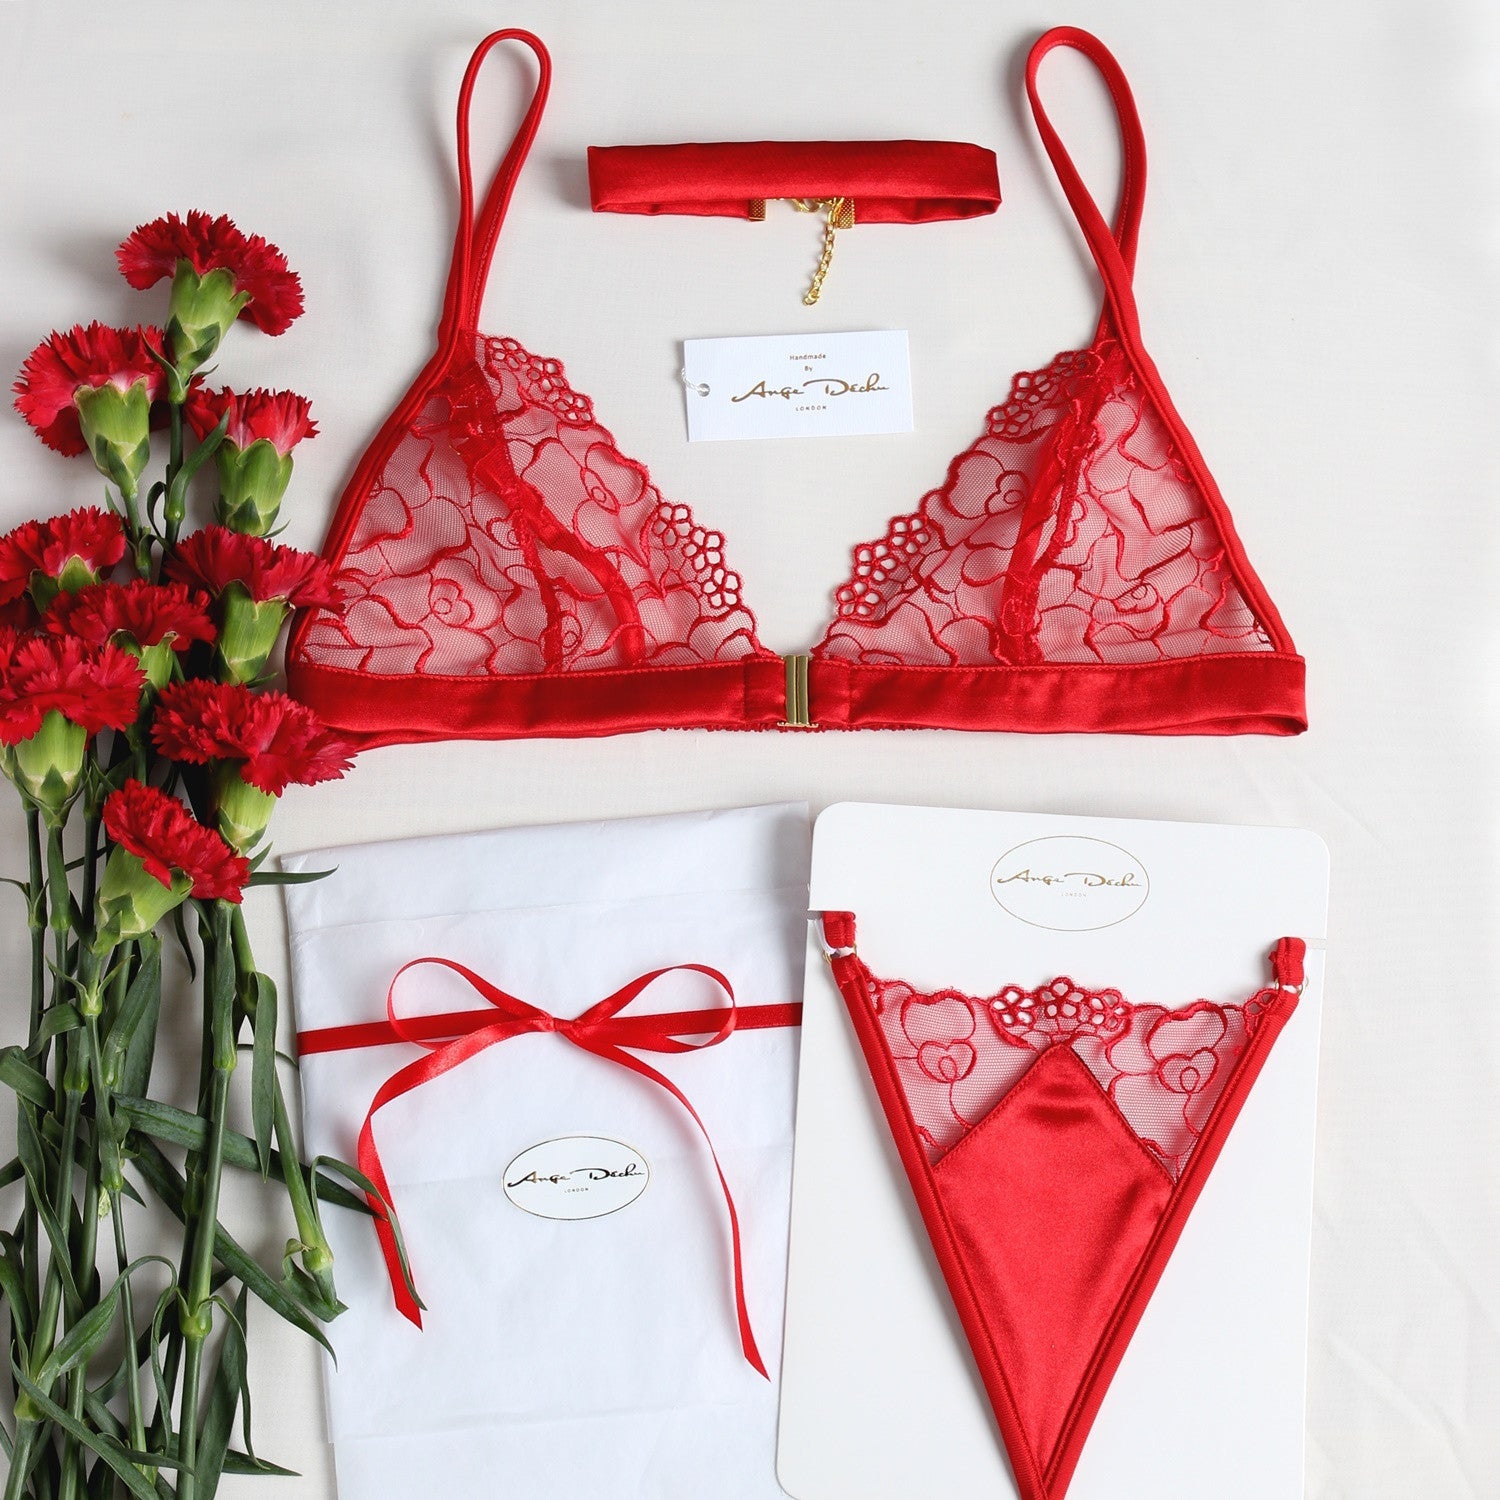 Sheer Lingerie Set See Through Erotic Lingerie Red Lace Bralette Bra and G  String Satin Choker Bridal Gift for Her by Ange Dechu 